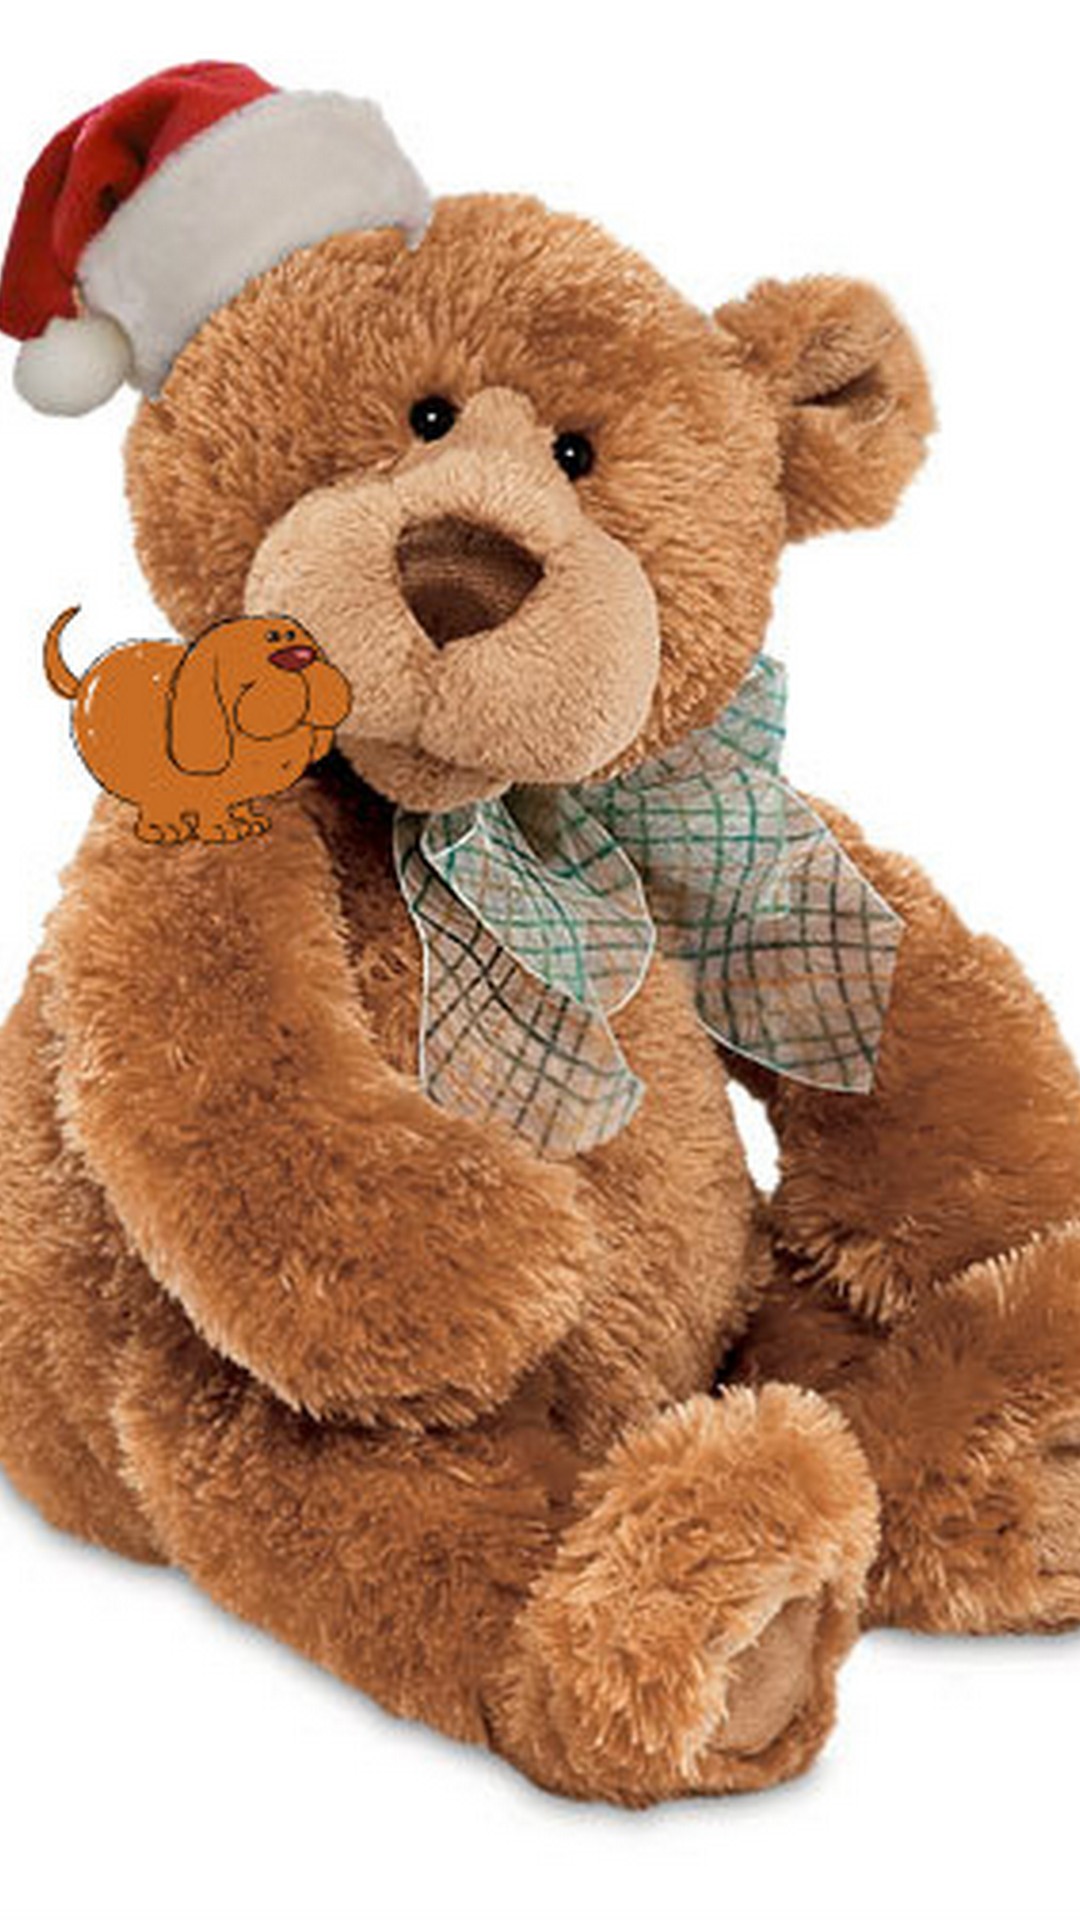 Teddy Bear Big Android Wallpaper - 2021 Android Wallpapers